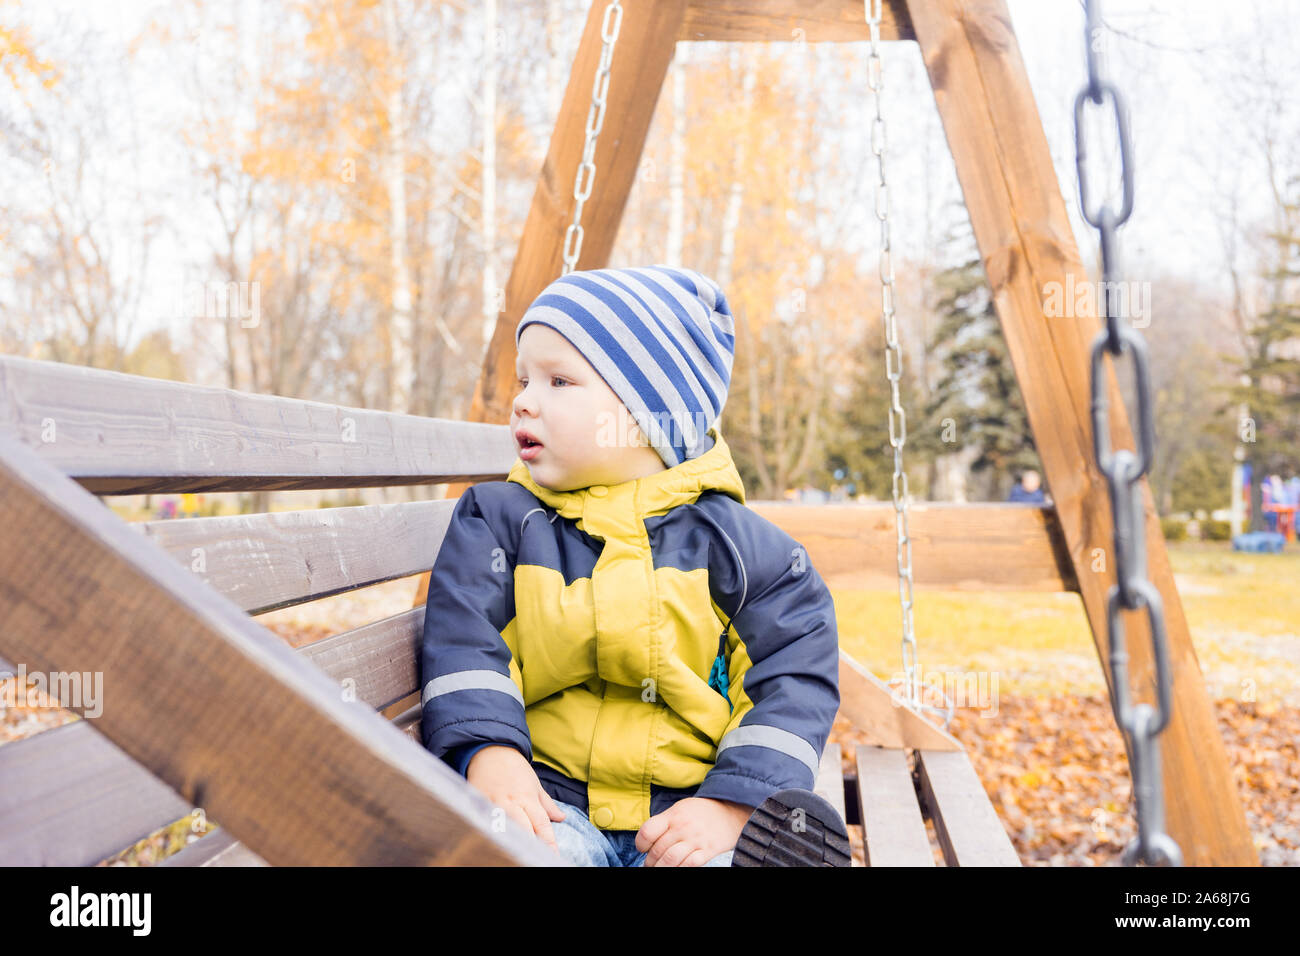 toddler child looks around with interest swinging on wooden swing on Sunny autumn day in city Park. Stock Photo